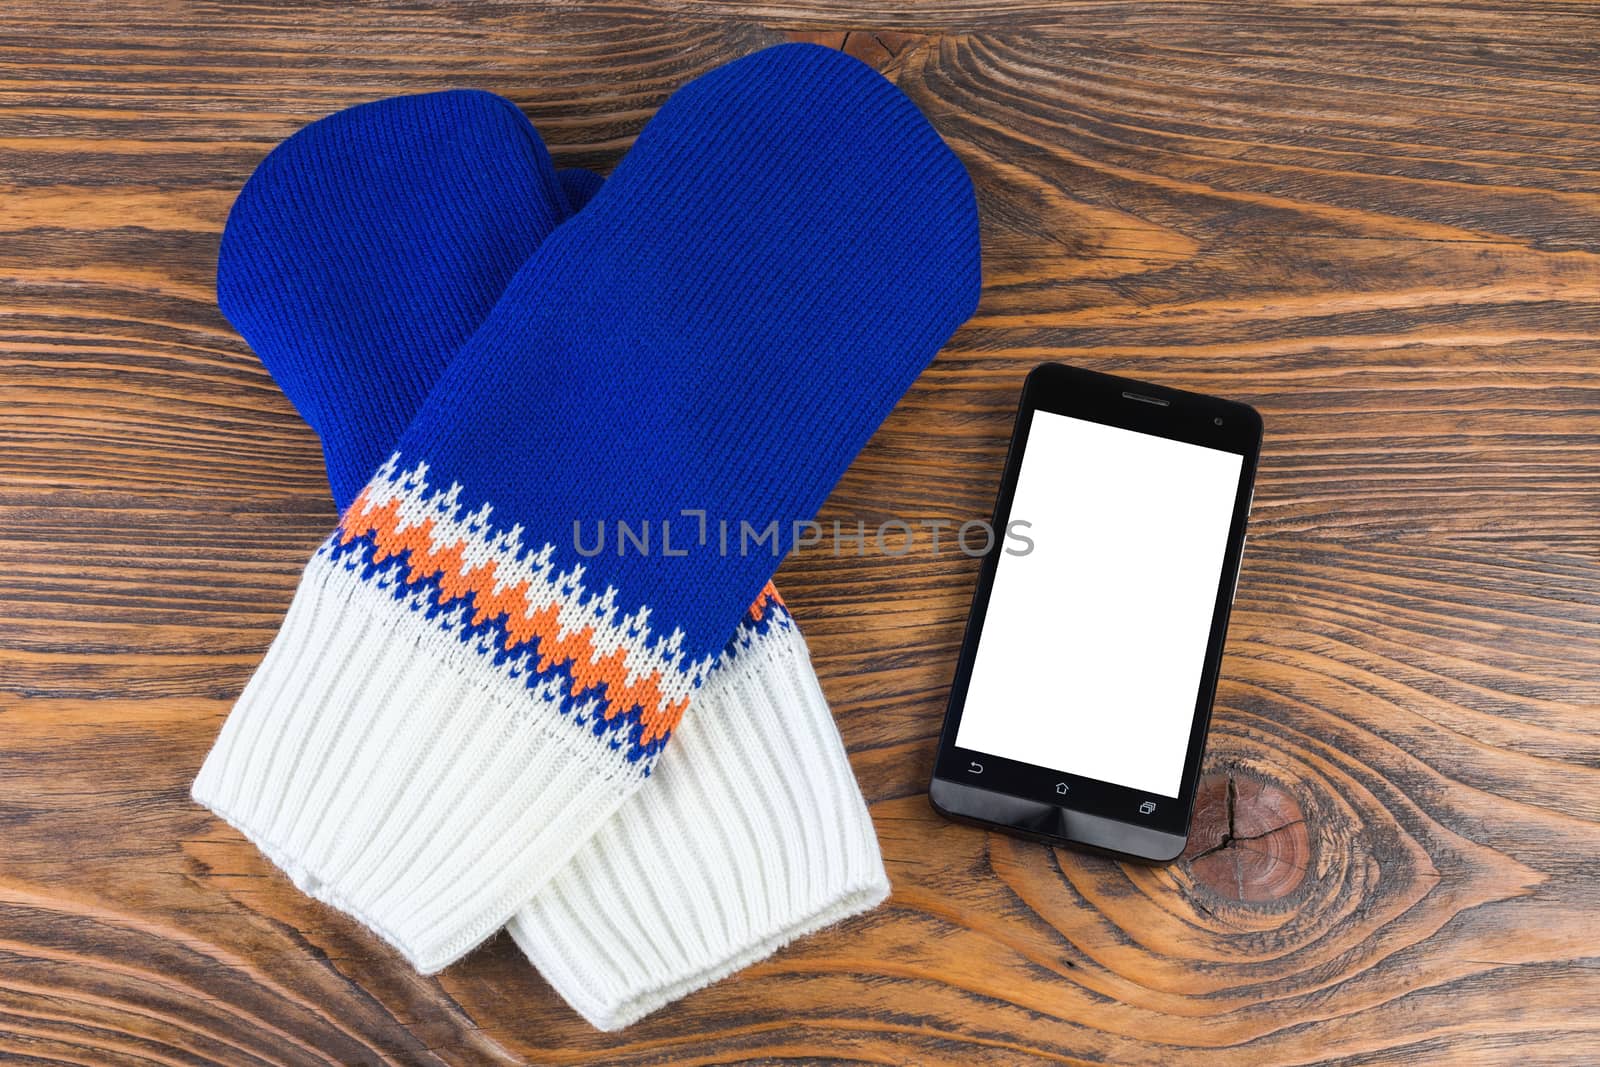 blue and white knited mittens with cellphone on wooden background.